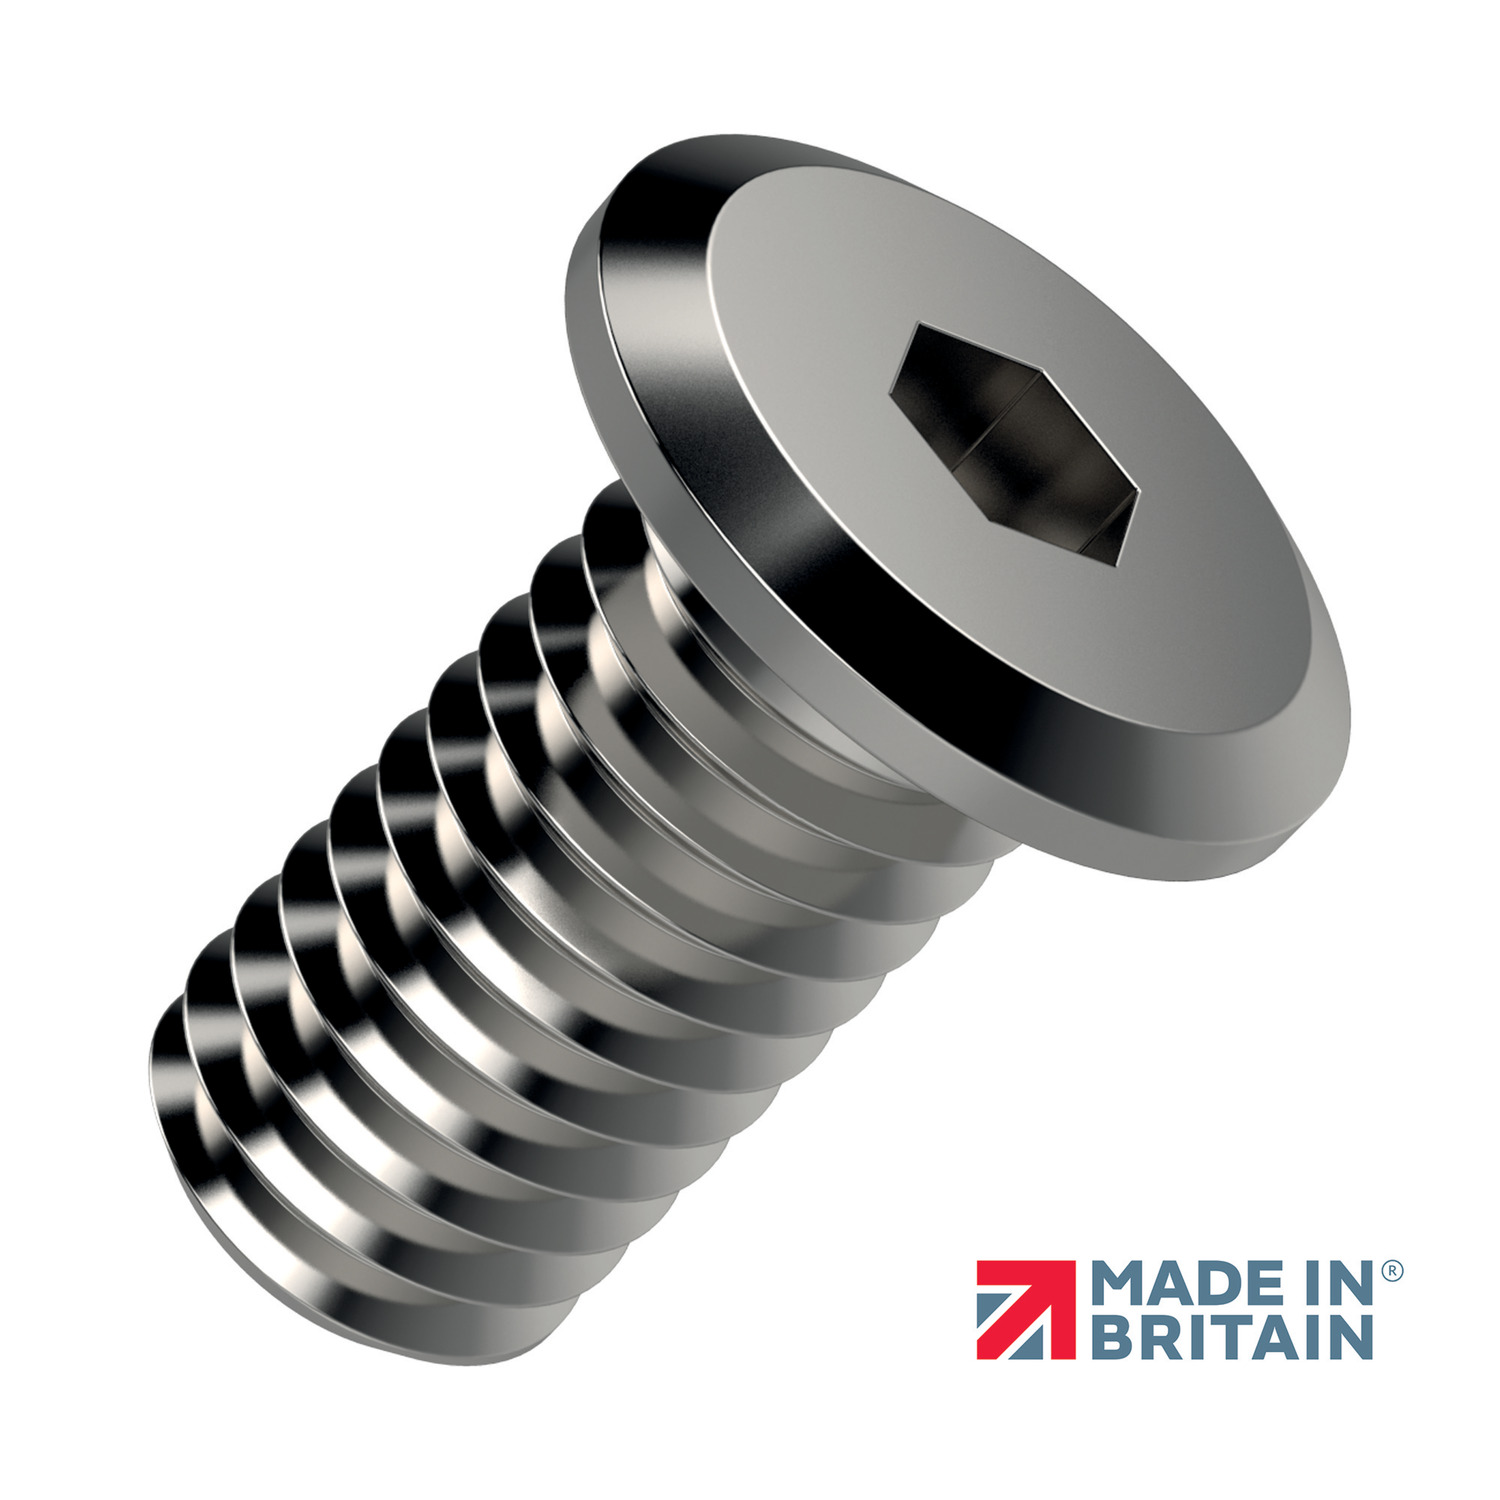 Ultra Low Head Cap Screws Stainless Steel A2. The ultra low head is extremely low profile. These screws do not require a countersunk location hole. Most suitable for machine and equipment applications with minimal clearance.  Also available in Stainless Steel A4 (P0208.A4), Titanium (P0208.Ti) and a blackened finish (P0208.B2 & P0208.B4).